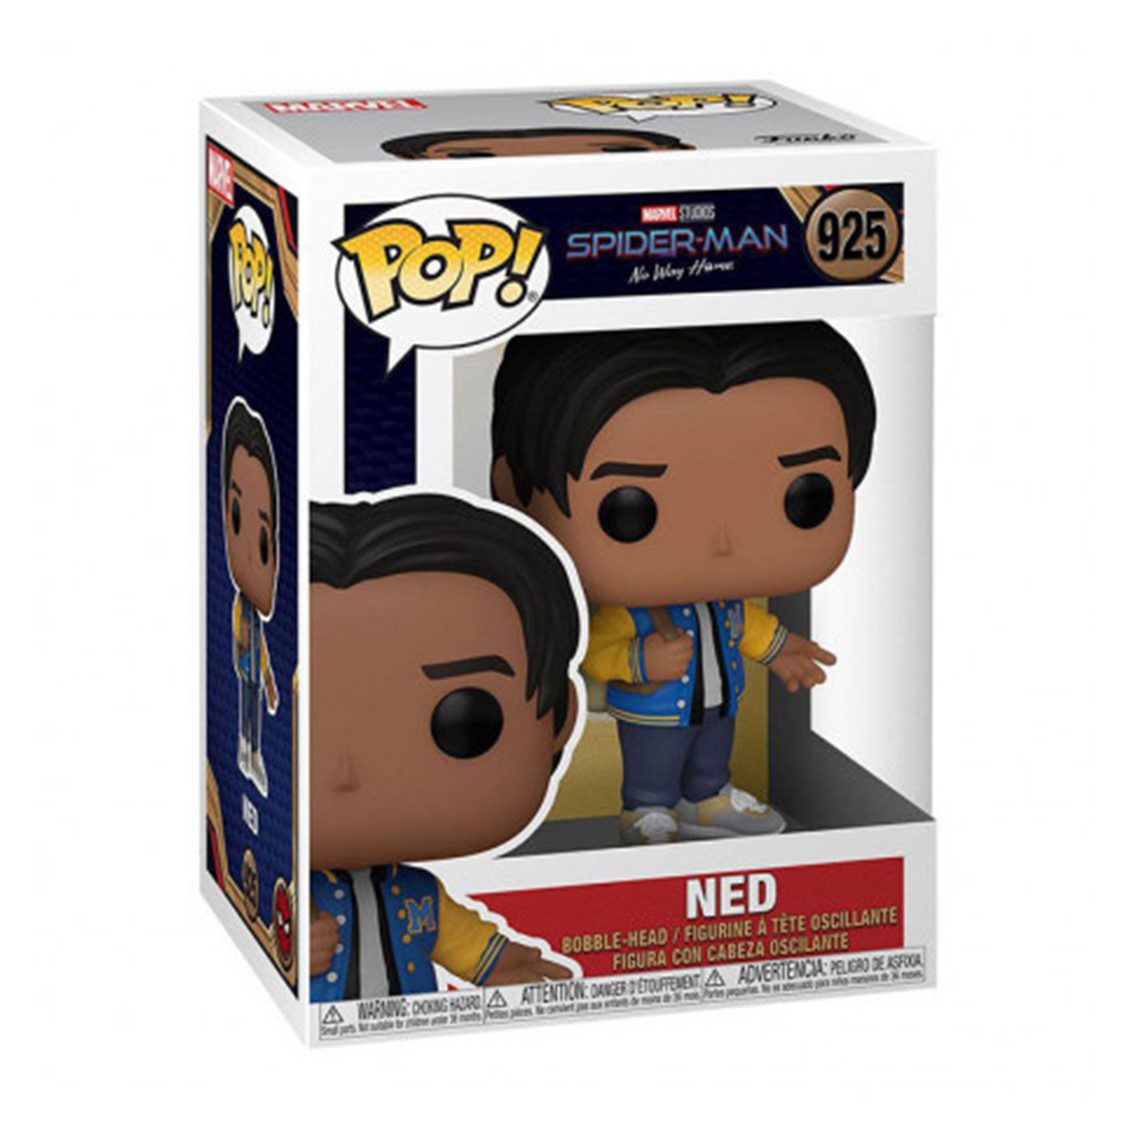 889698576369-PN-57636-Cod.-Articulo-MGS0000006990-Funko-pop-marvel-spiderman-no-way-home-ned-57636-2